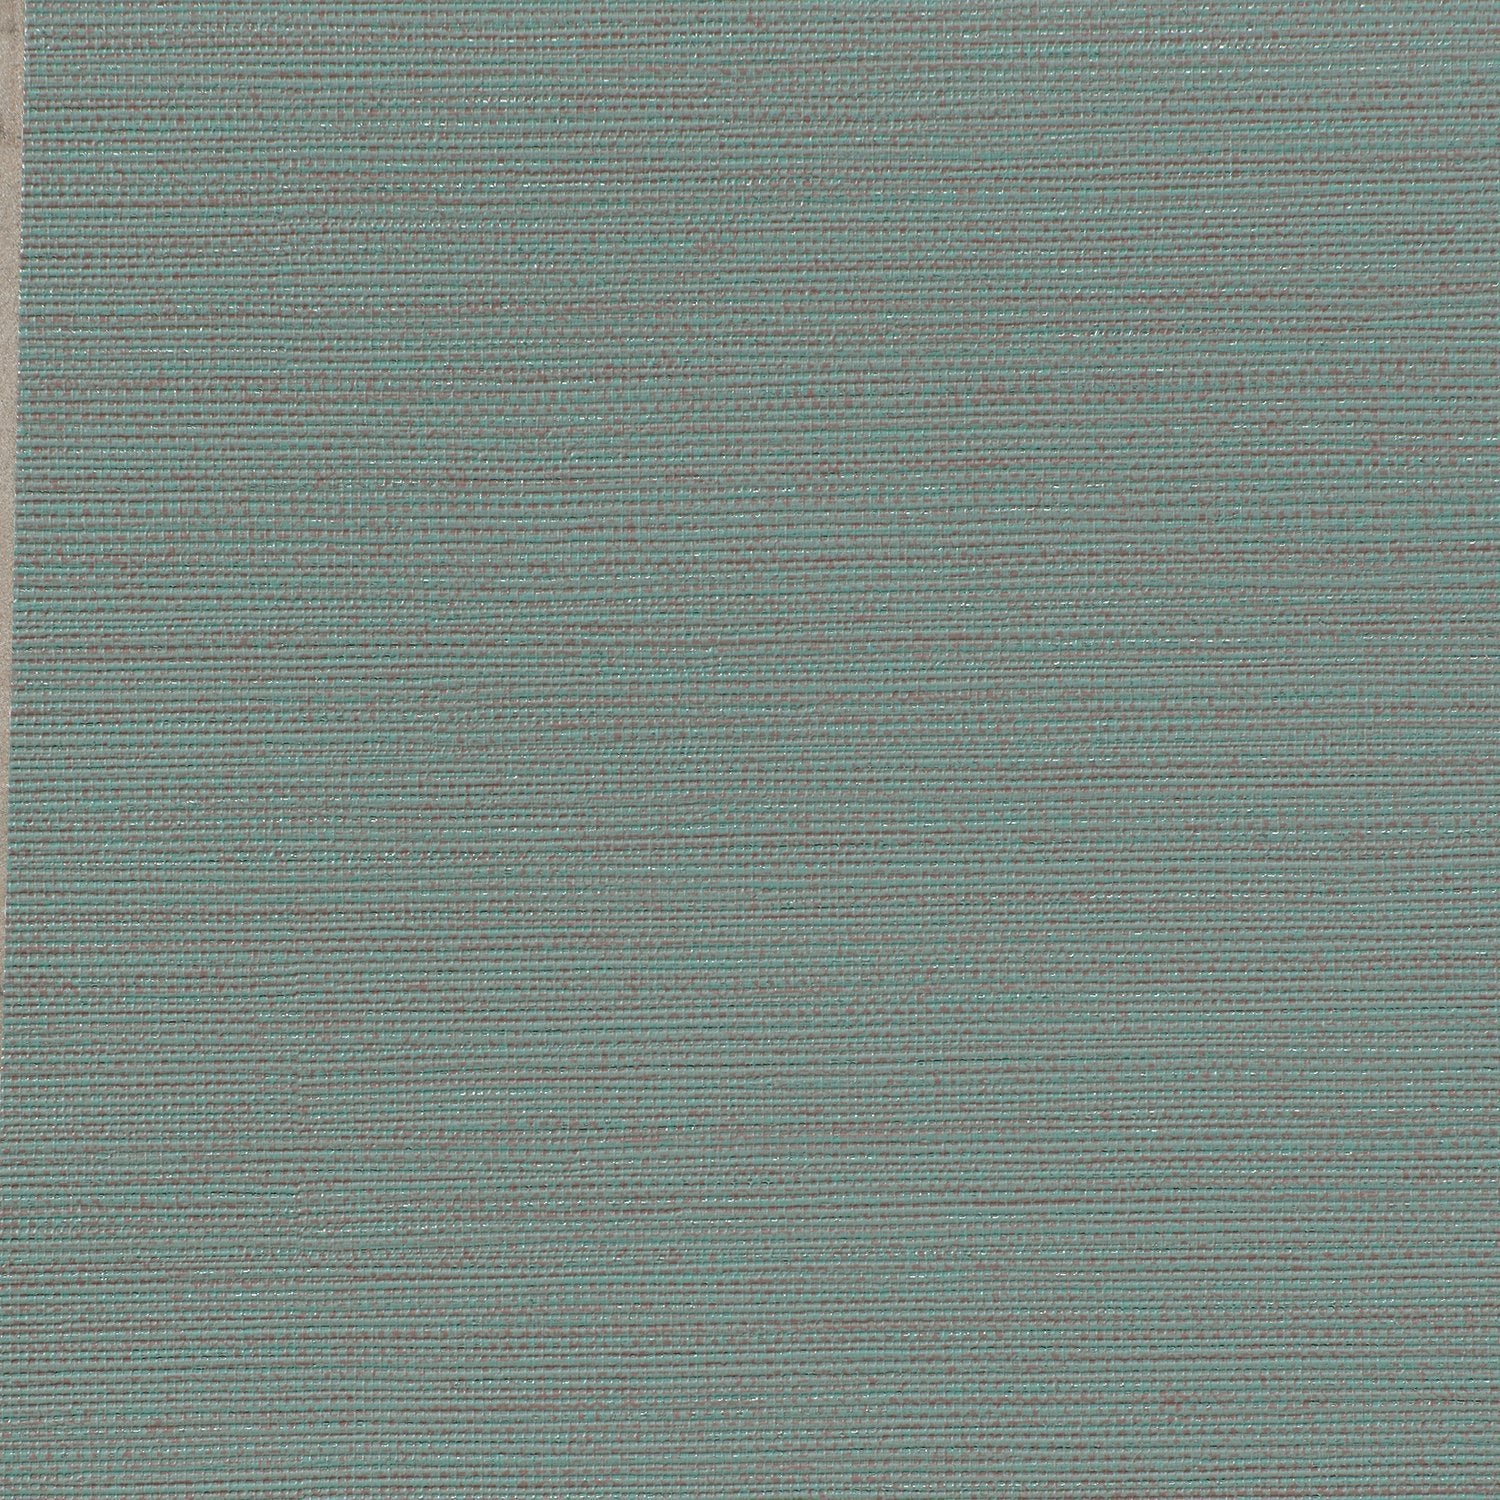 Make It Mylar - Y47851 - Wallcovering - Vycon - Kube Contract